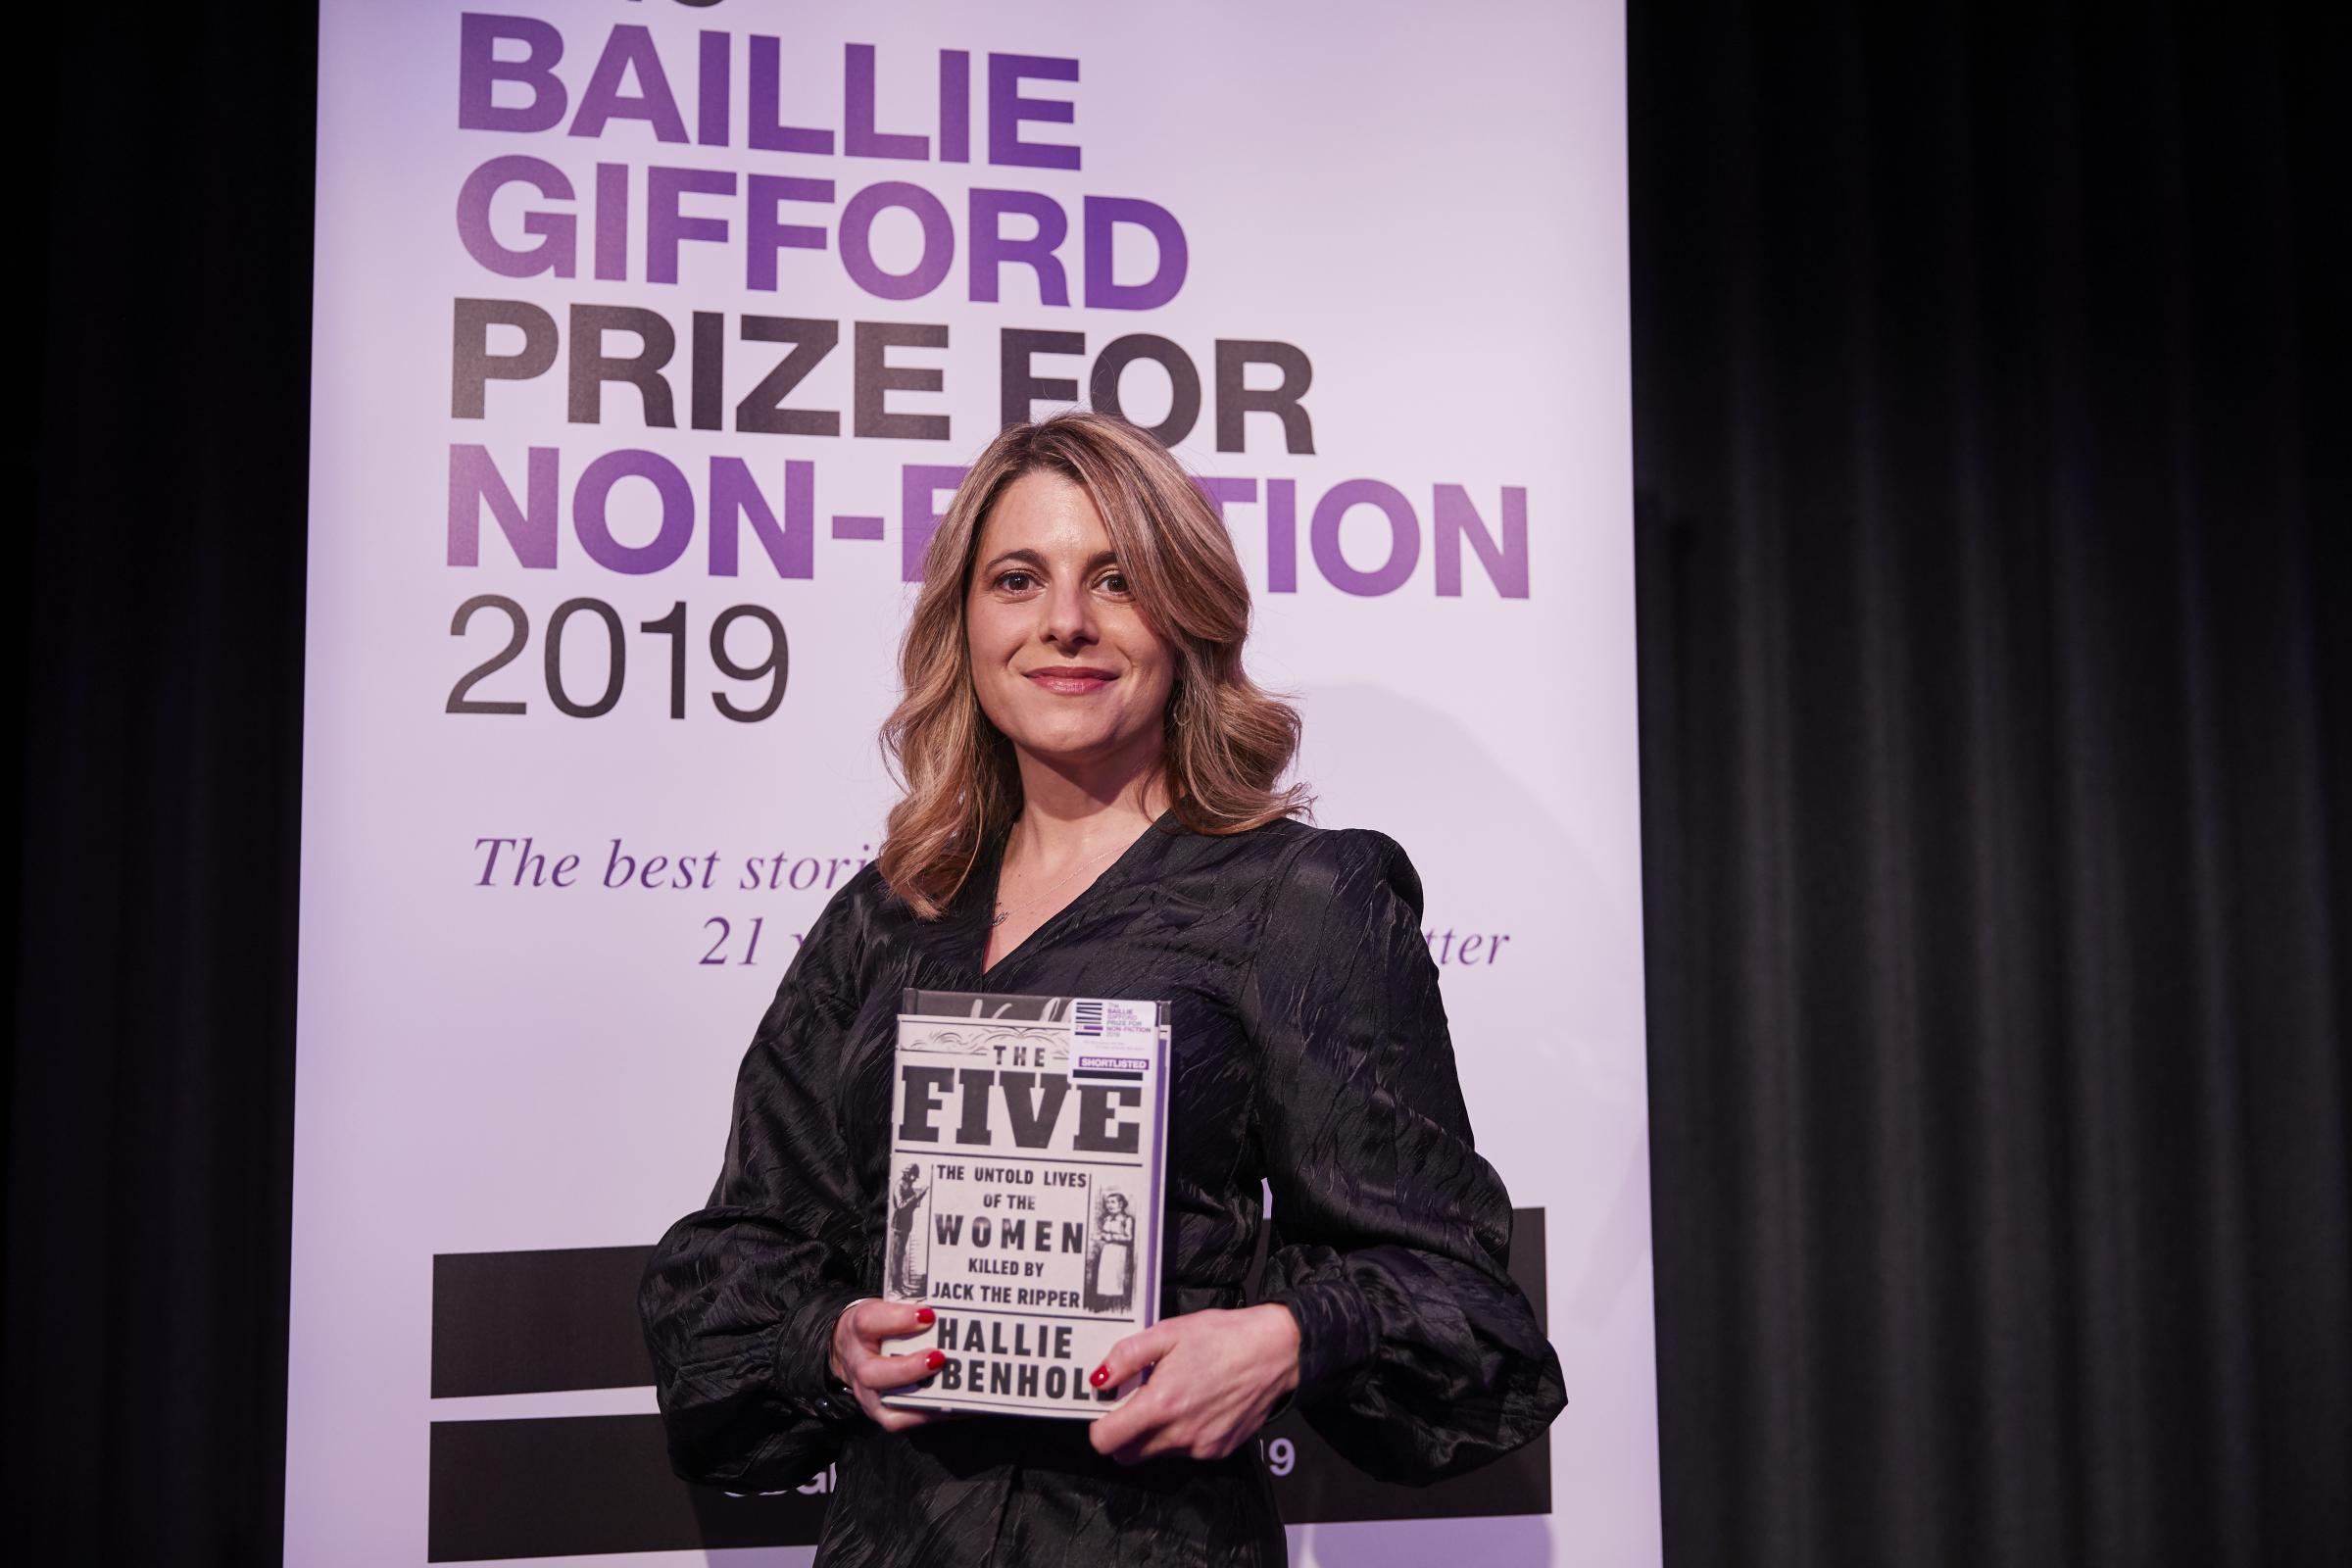 Baillie Gifford Prize won by biography of Jack the Ripper victims